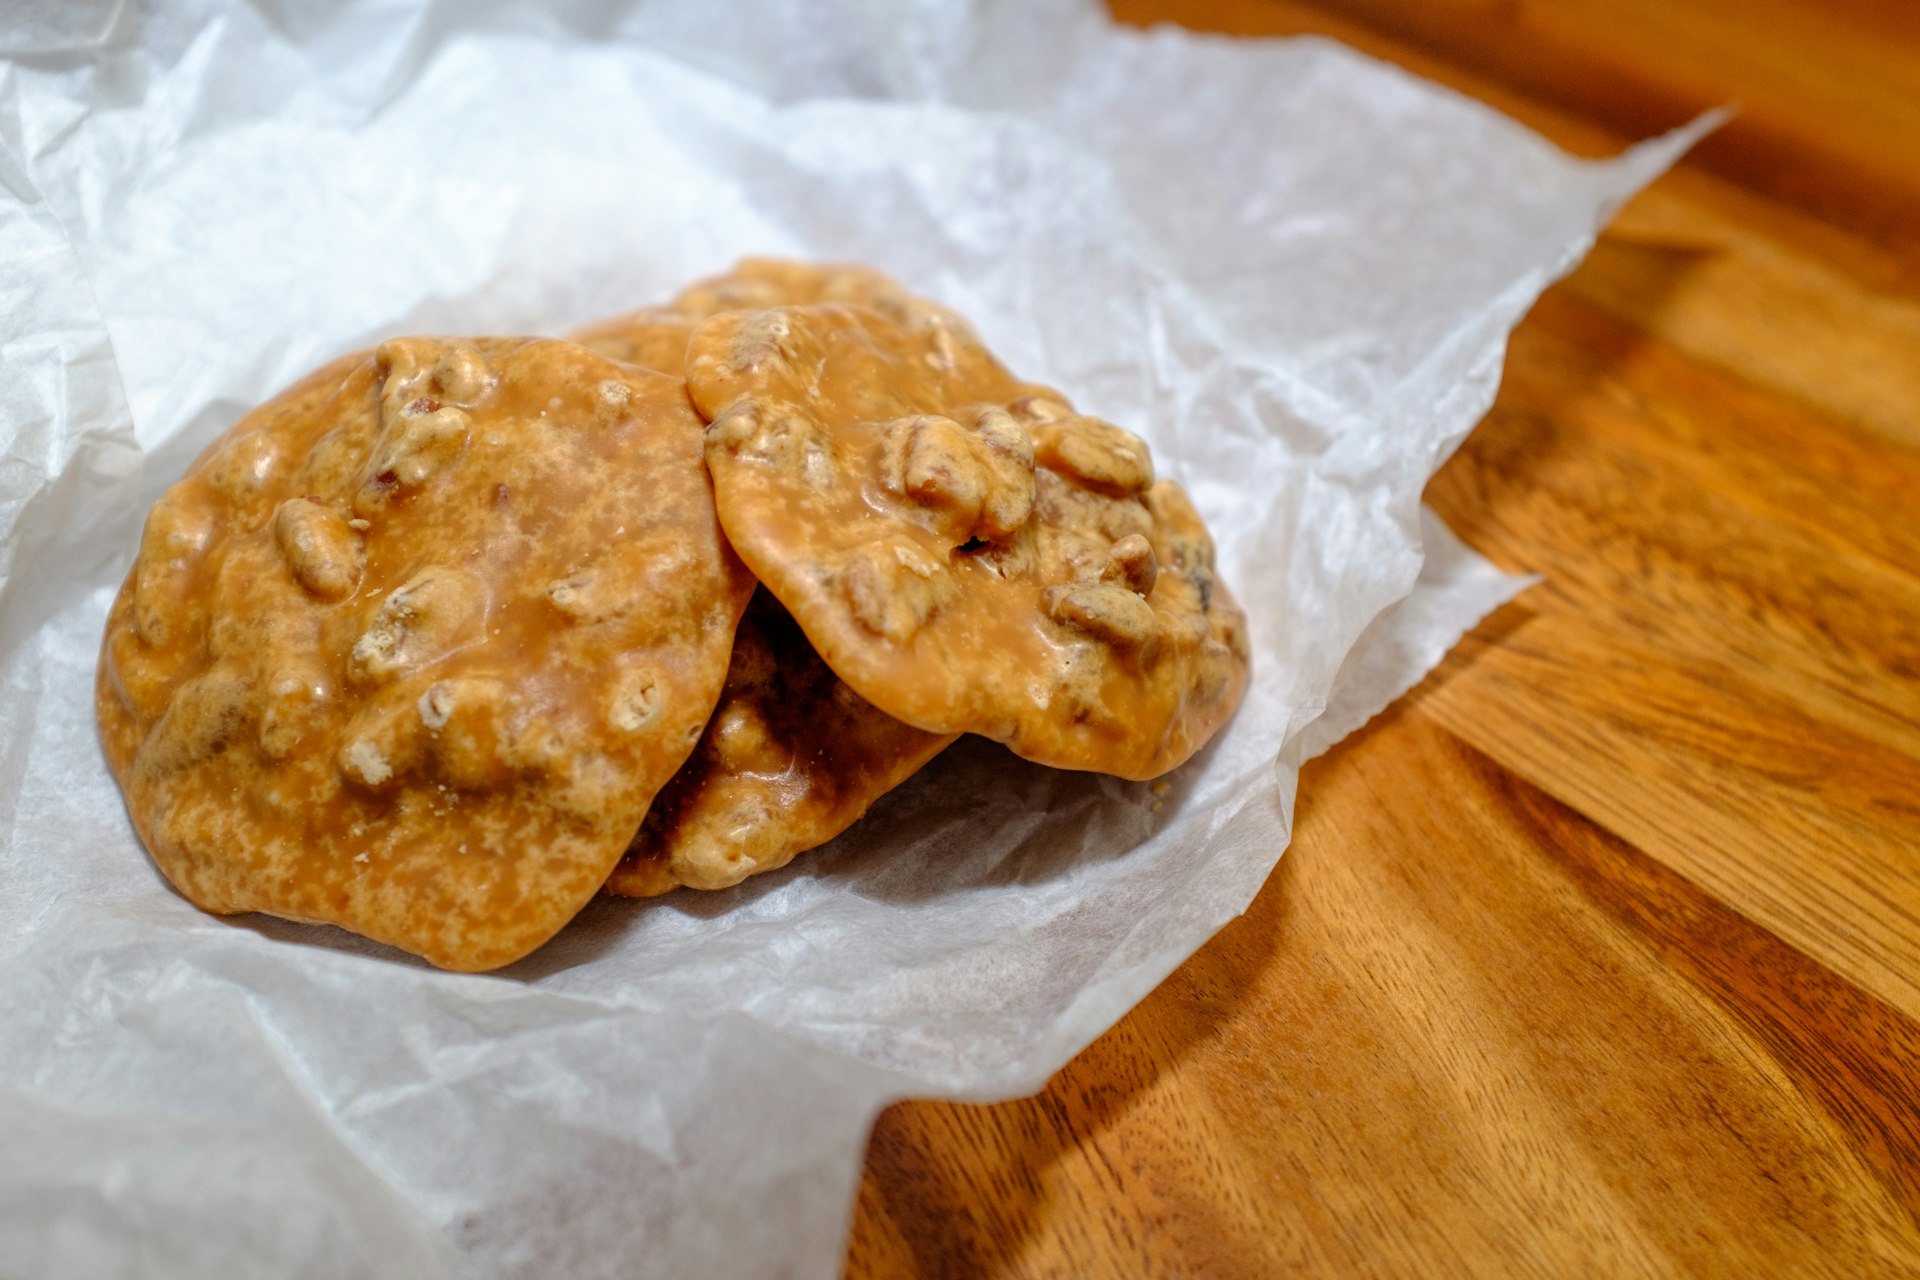 Three caramel-colored pralines sit in pastry paper